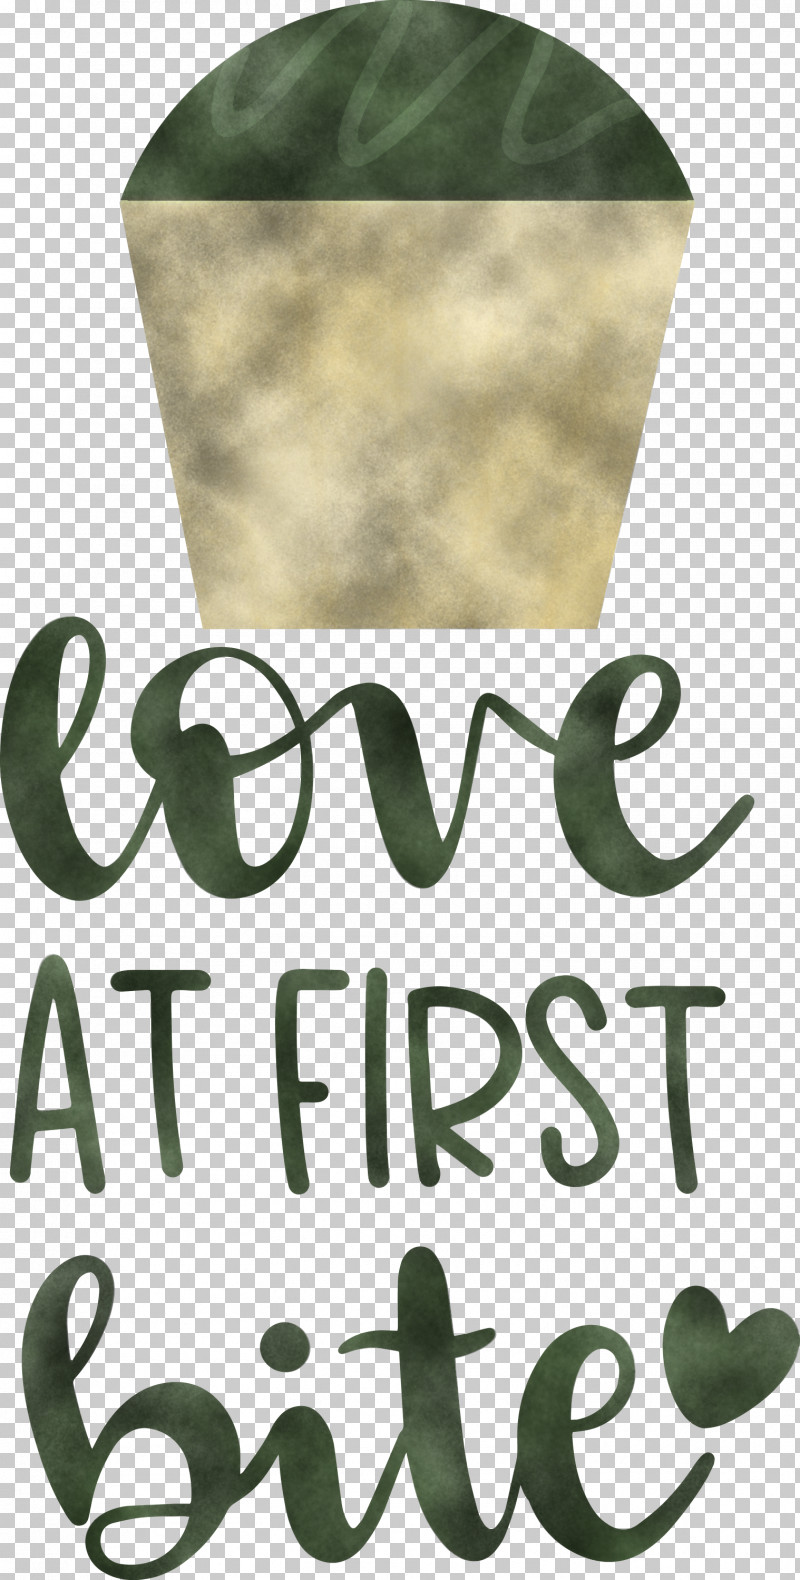 Love At First Bite Cooking Kitchen PNG, Clipart, Cooking, Cupcake, Food, Green, Kitchen Free PNG Download